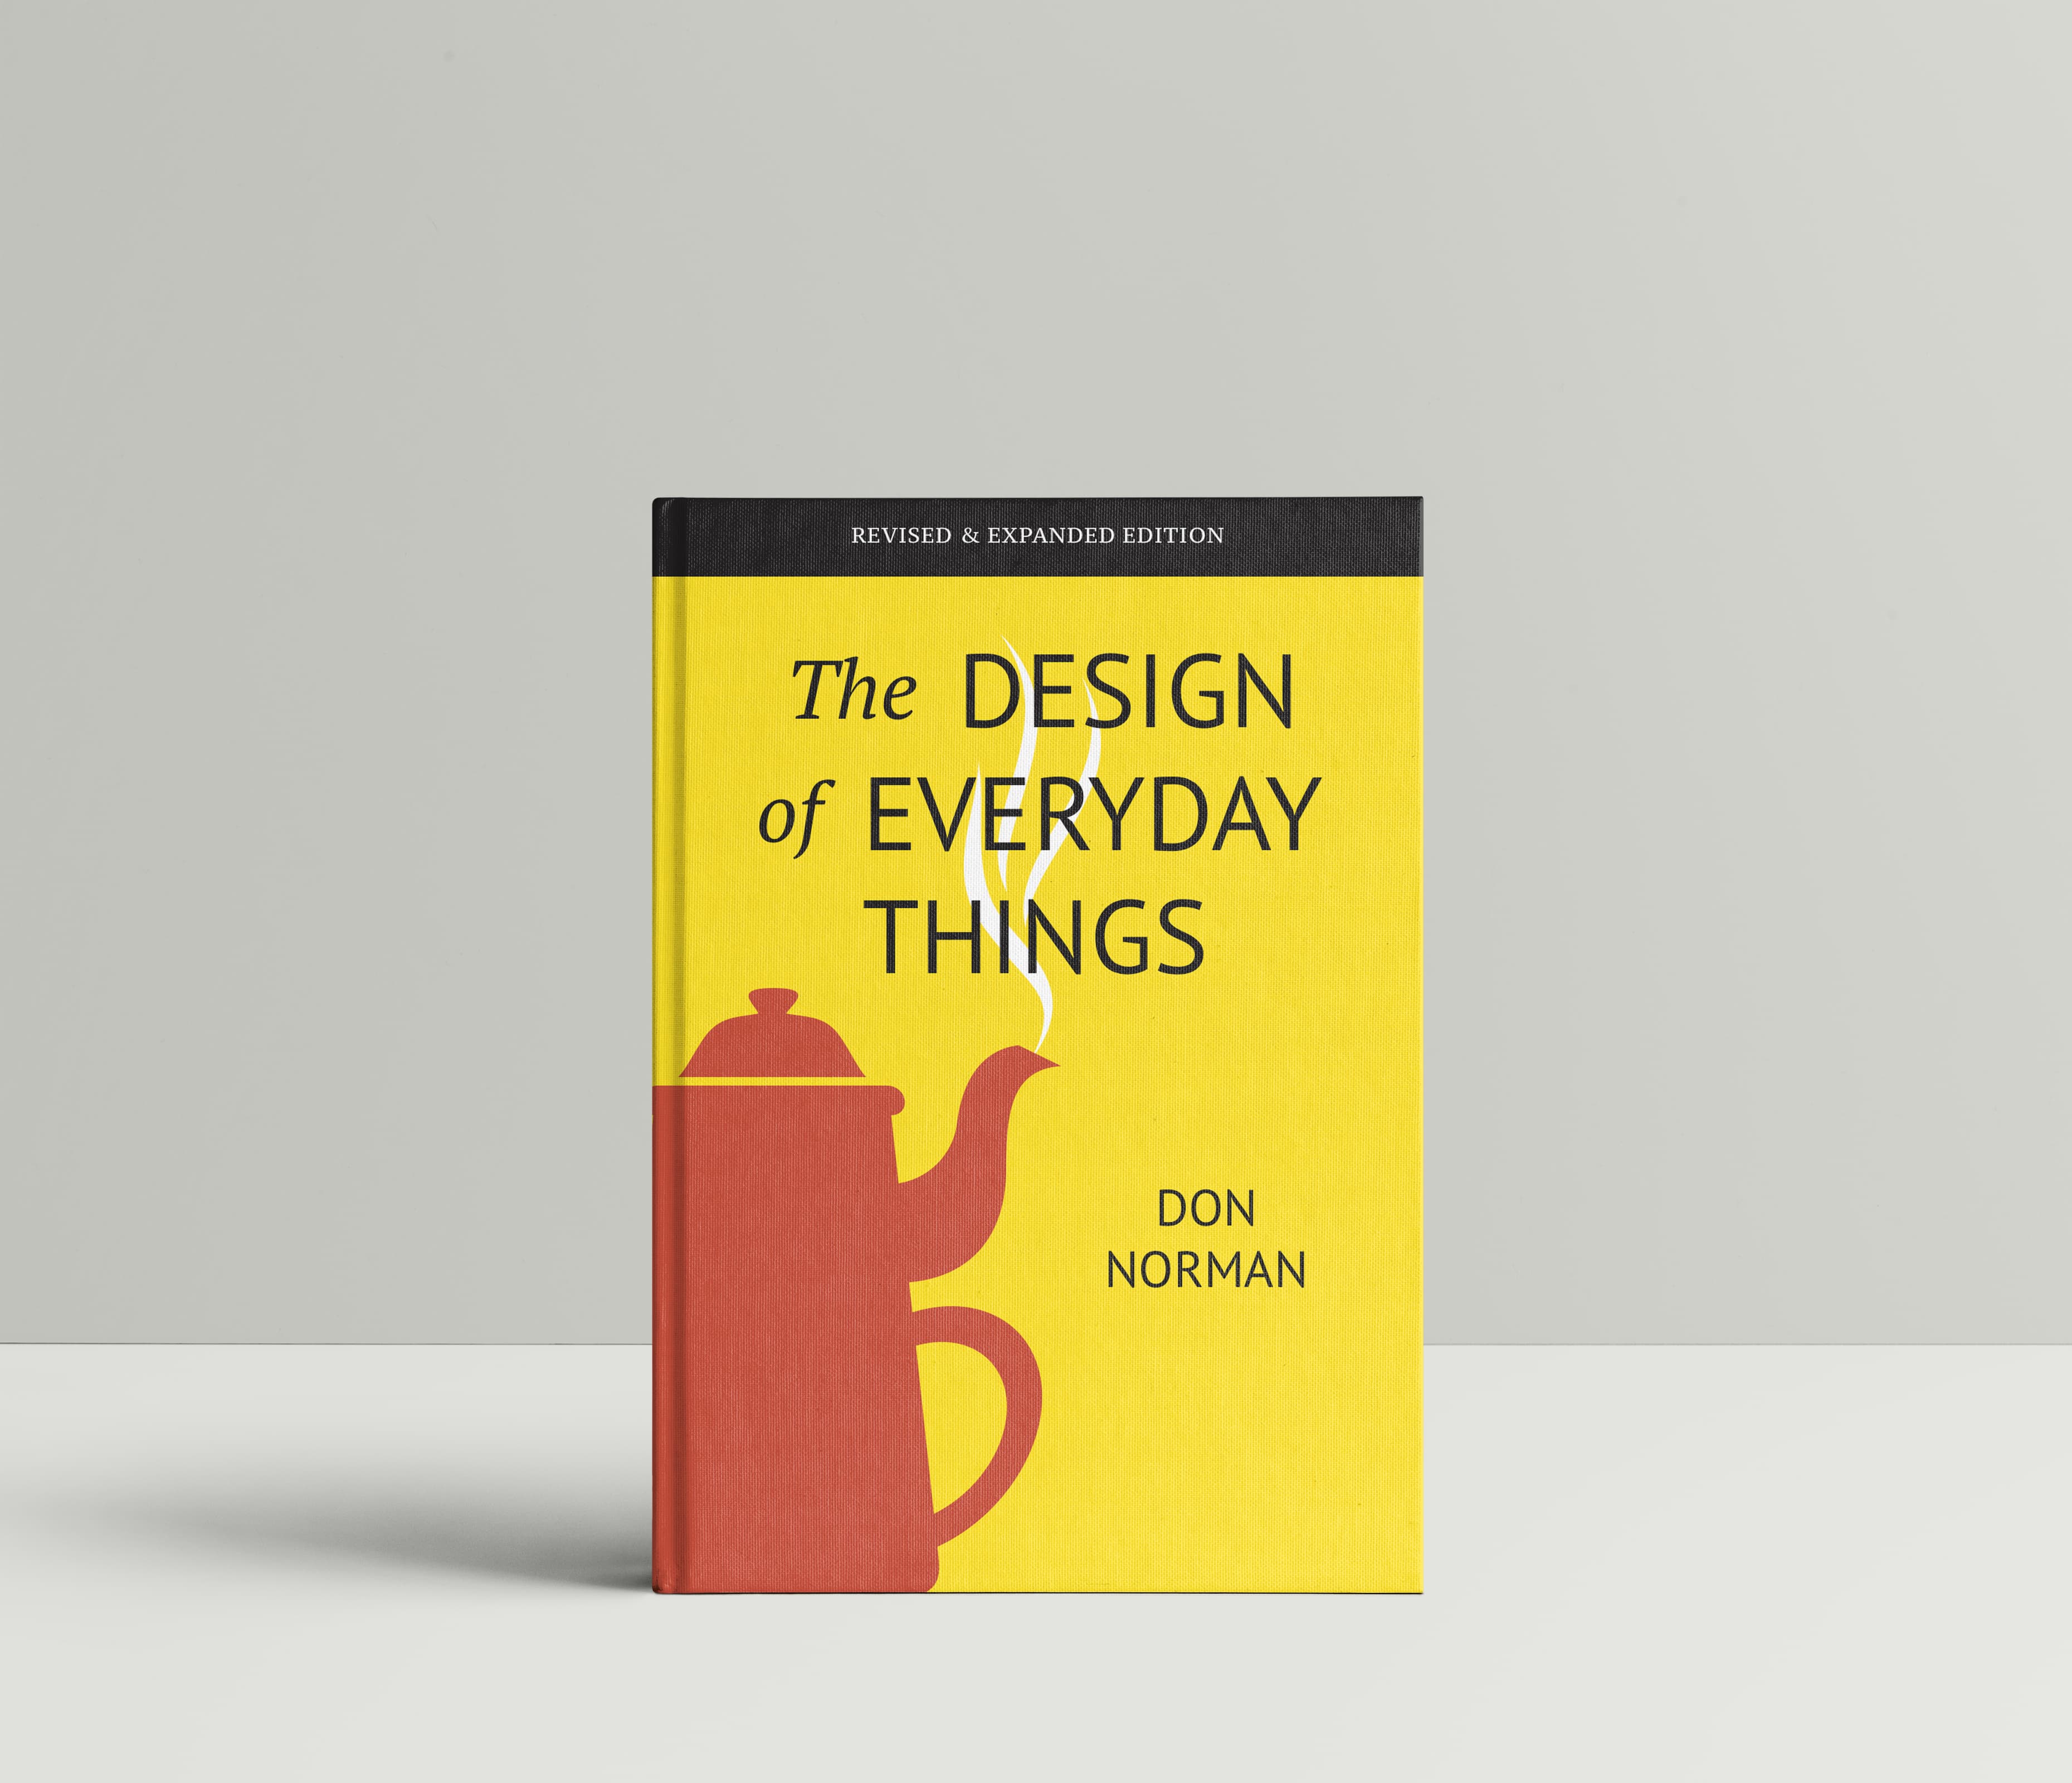 Read These 3 Books To Instantly Boost Your Design Game By 10,433%